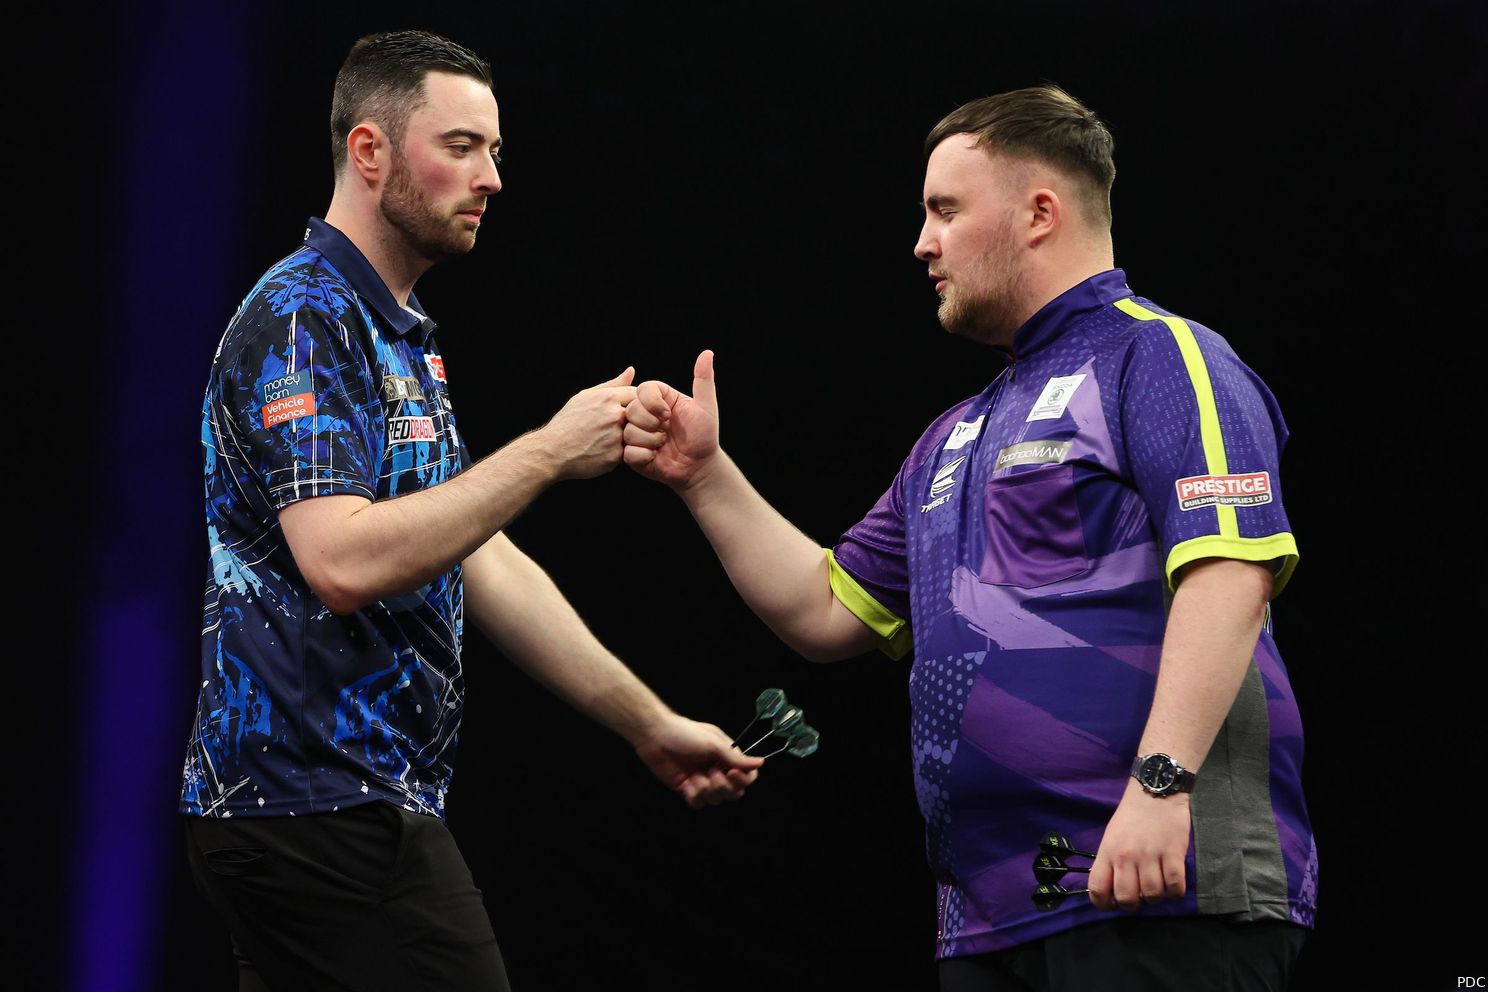 "We’re going to have plenty more battles in the future" - Luke Humphries praises Luke Littler as the pair put on another epic contest in Premier League final